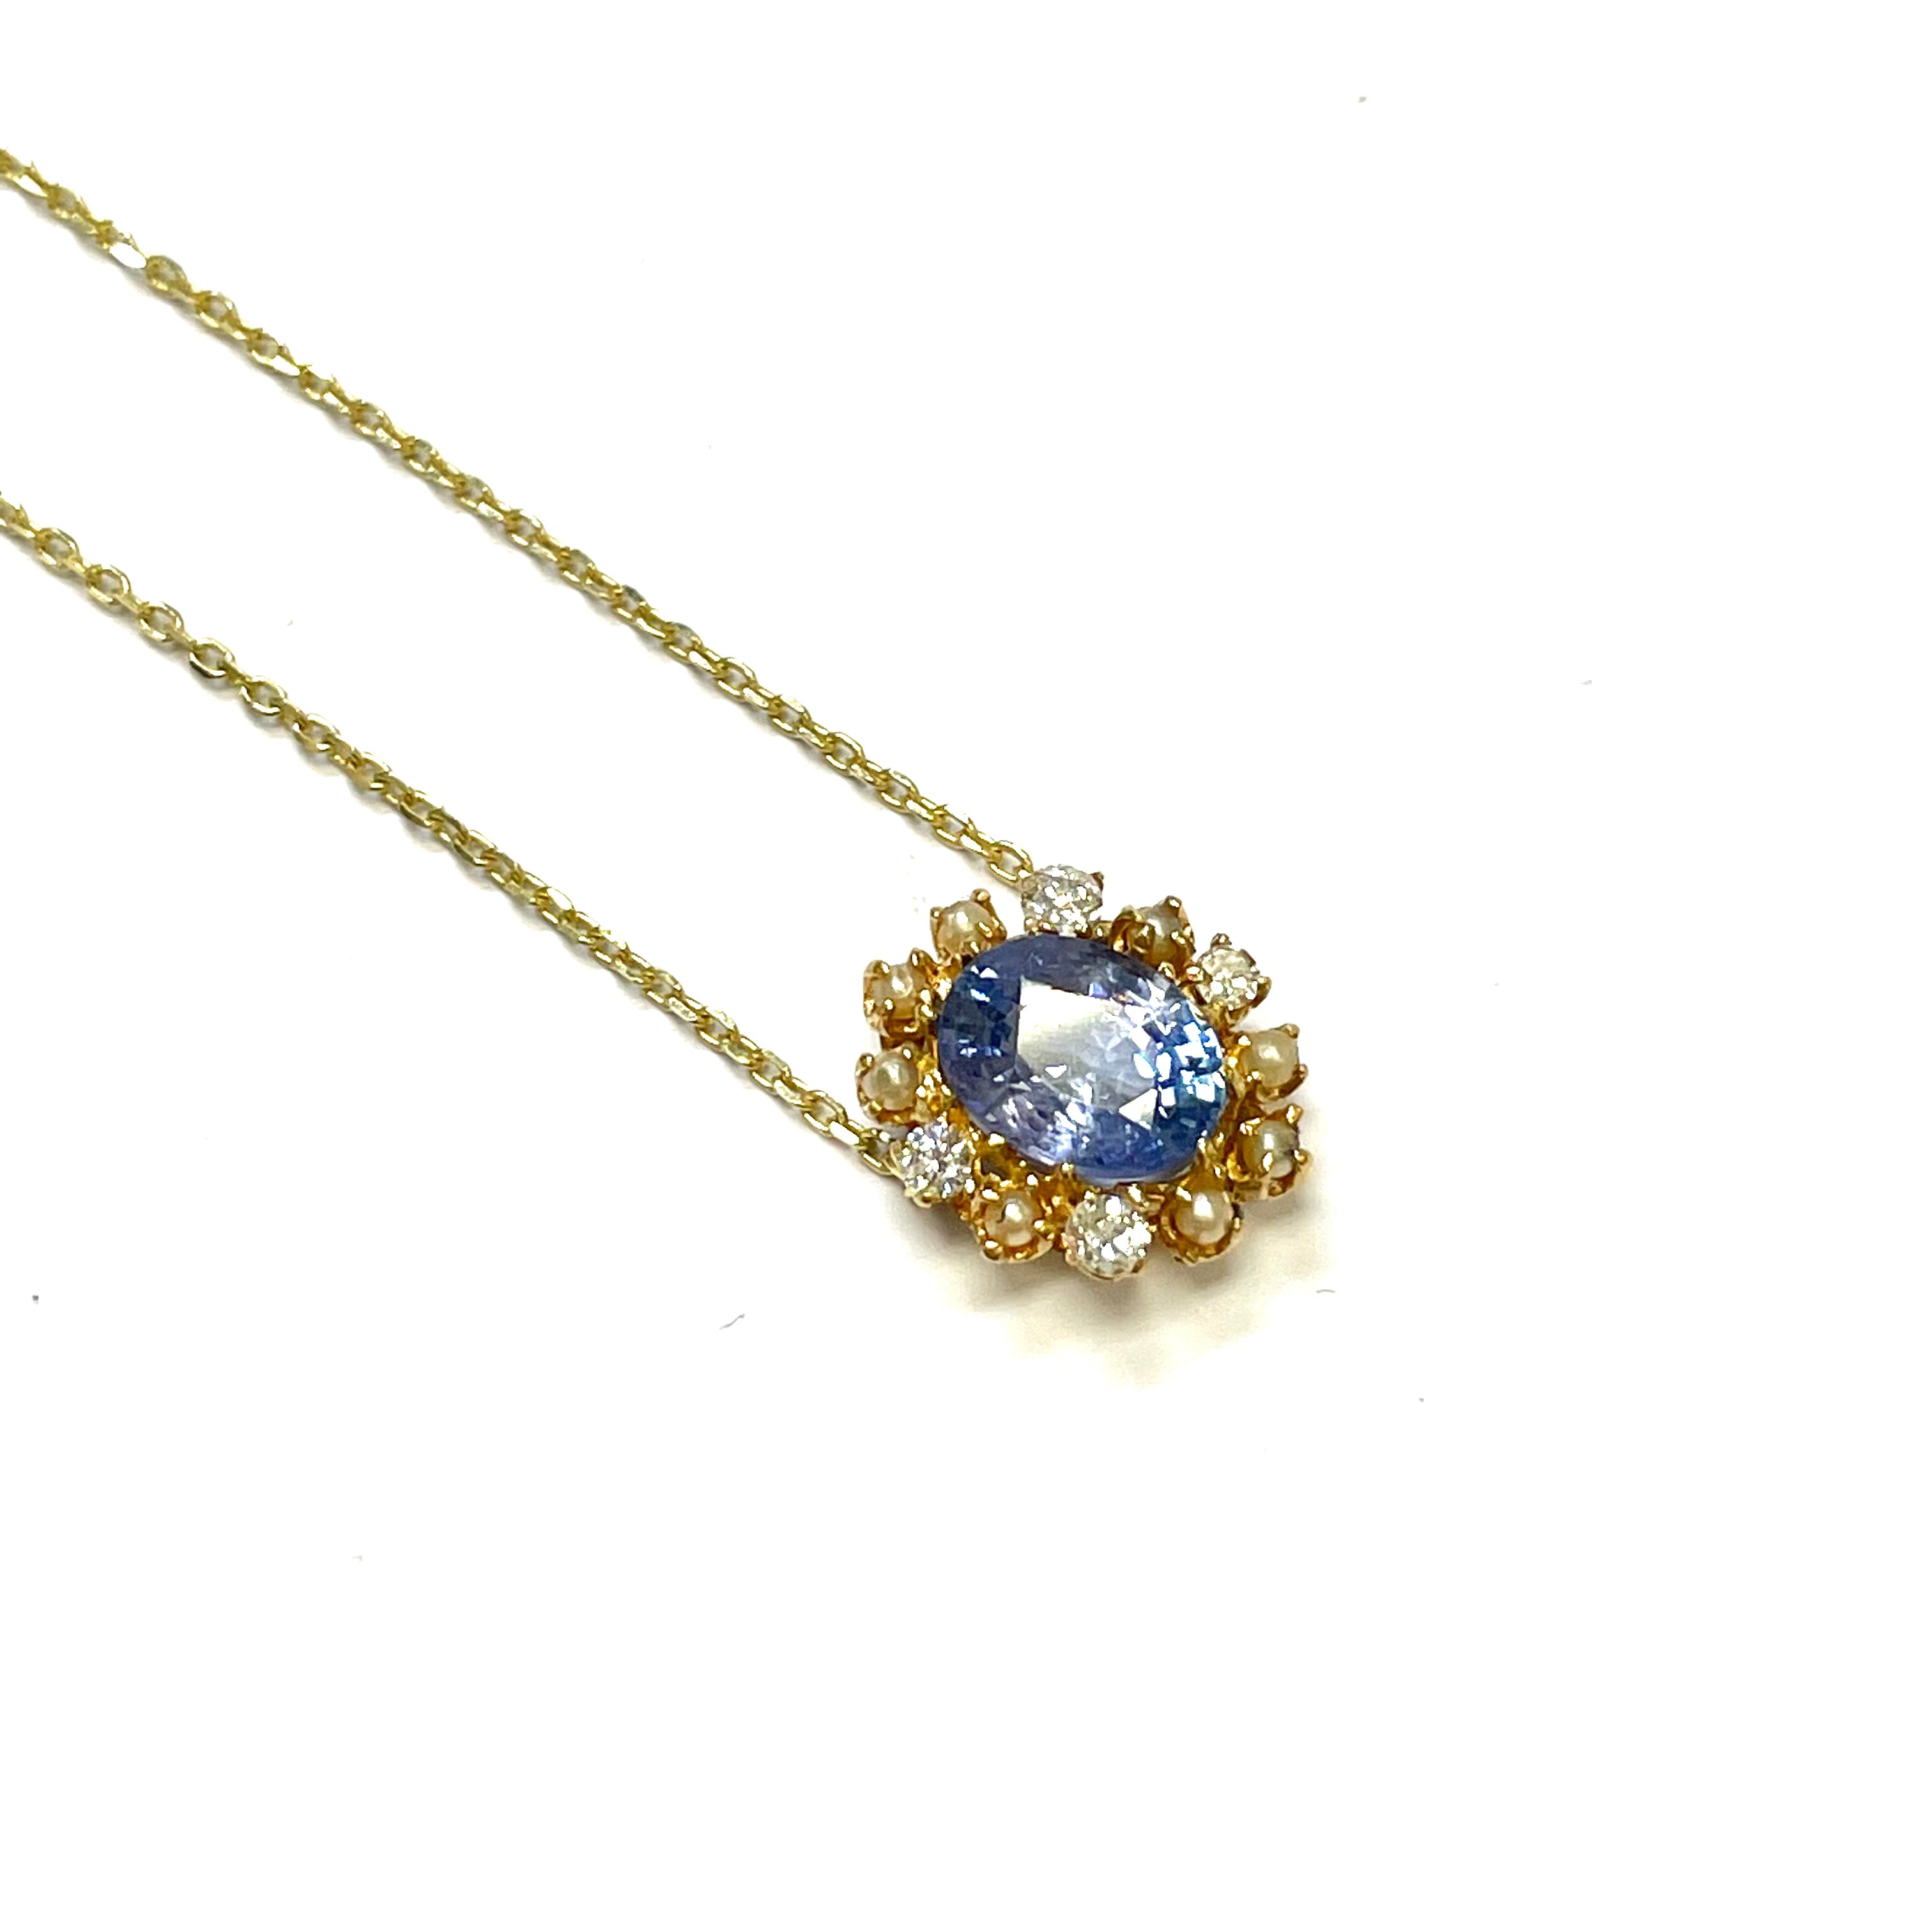 Floral Sapphire with Pearls and OMC Diamonds 14k Yellow Gold Necklace